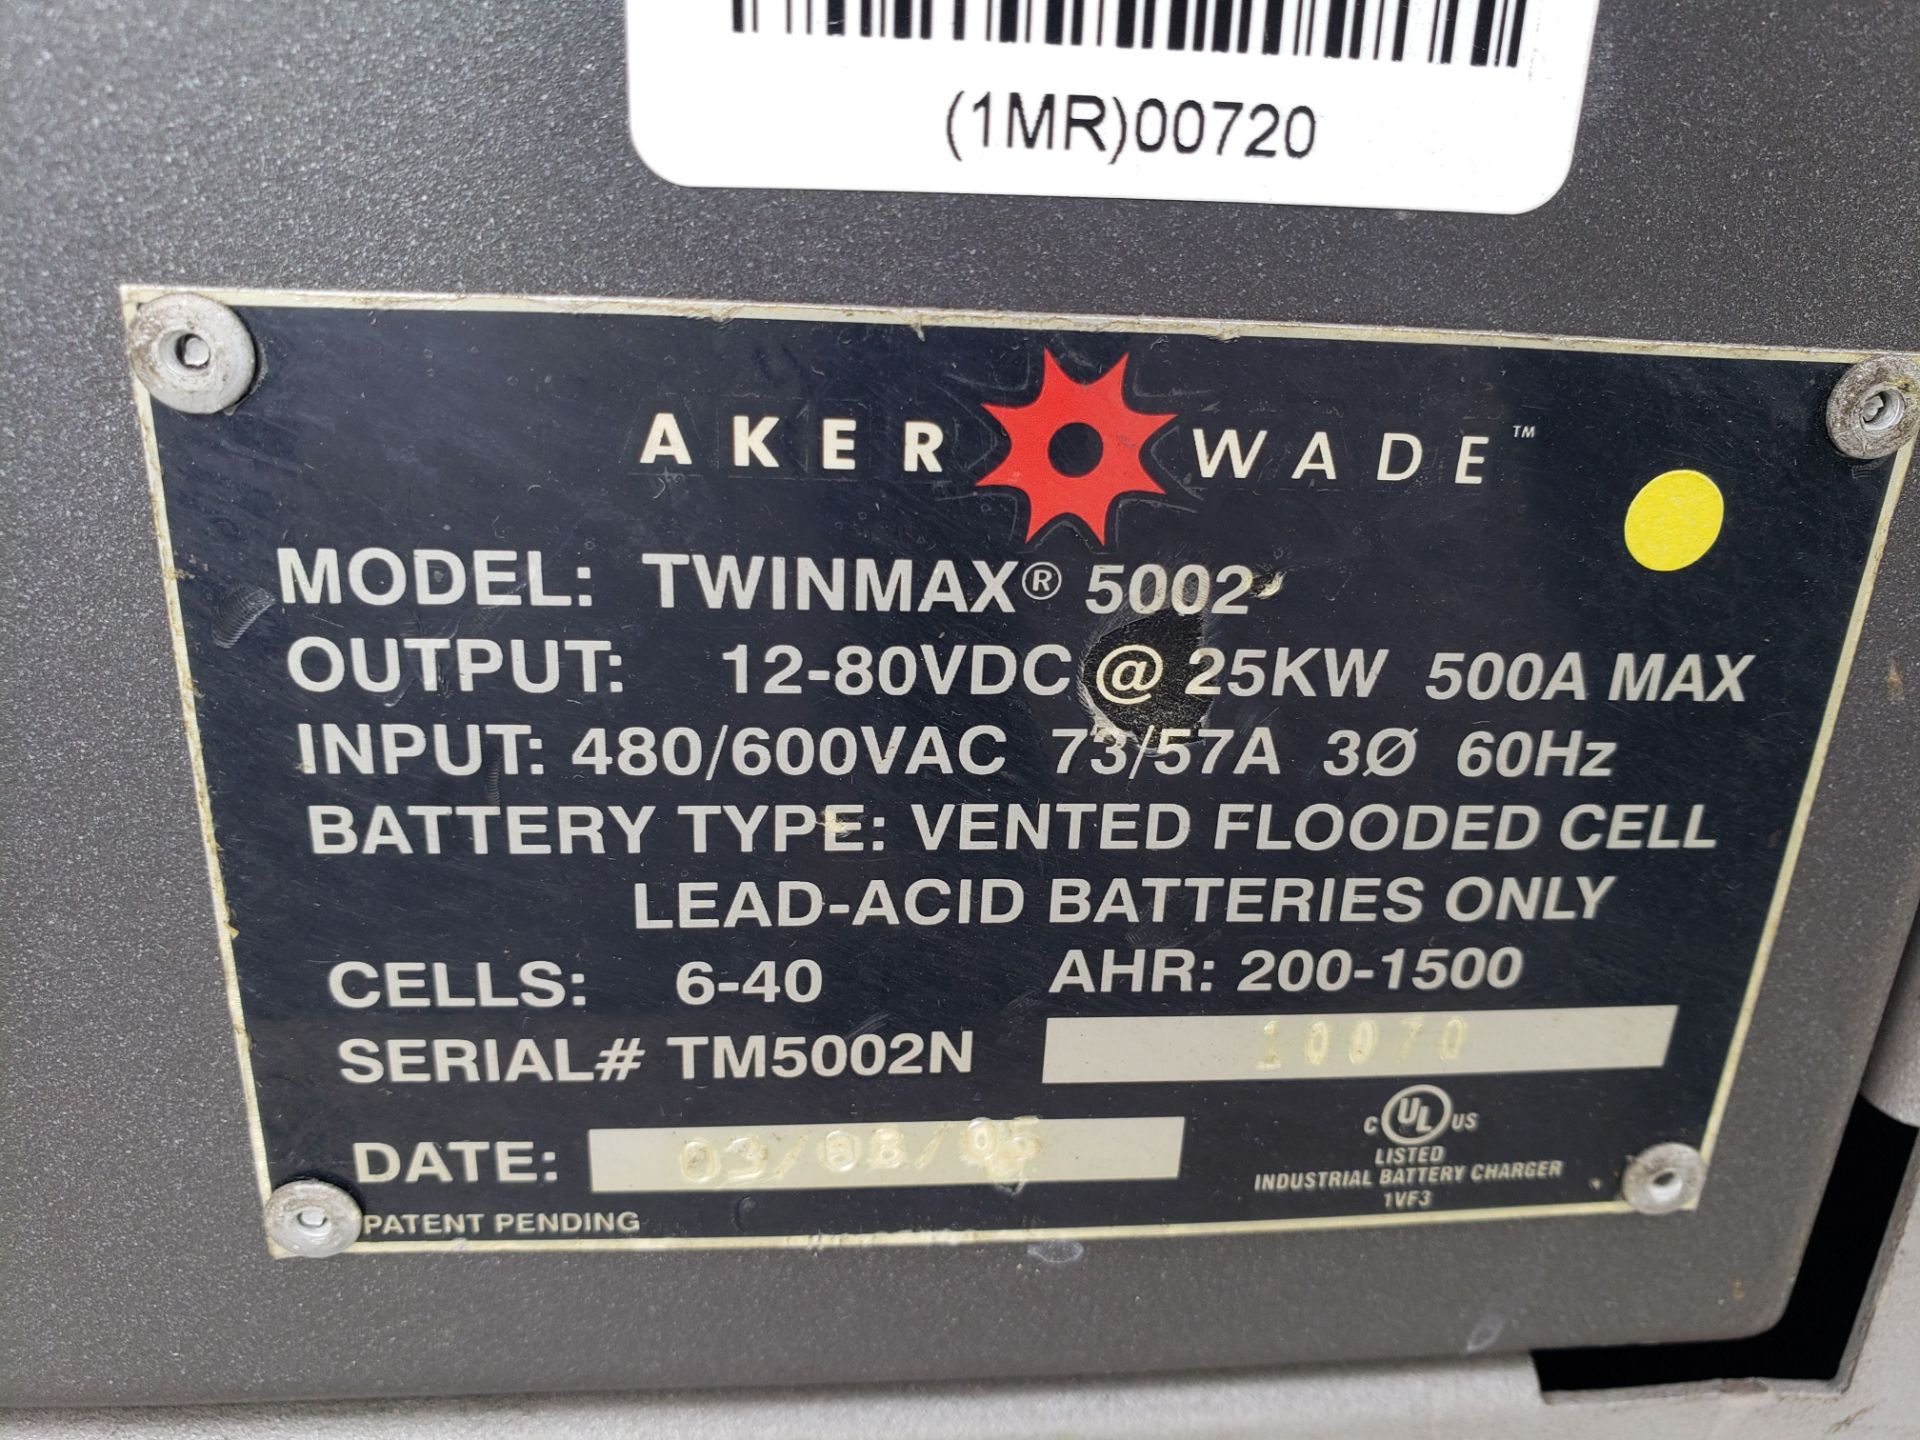 2005 AKER WADE TWIN MAX 5002 FAST CHARGER OUTPUT 12-80VDC@25KW 60 HZ CELLS-6-40 S#TM5002N 10070 - Image 3 of 3